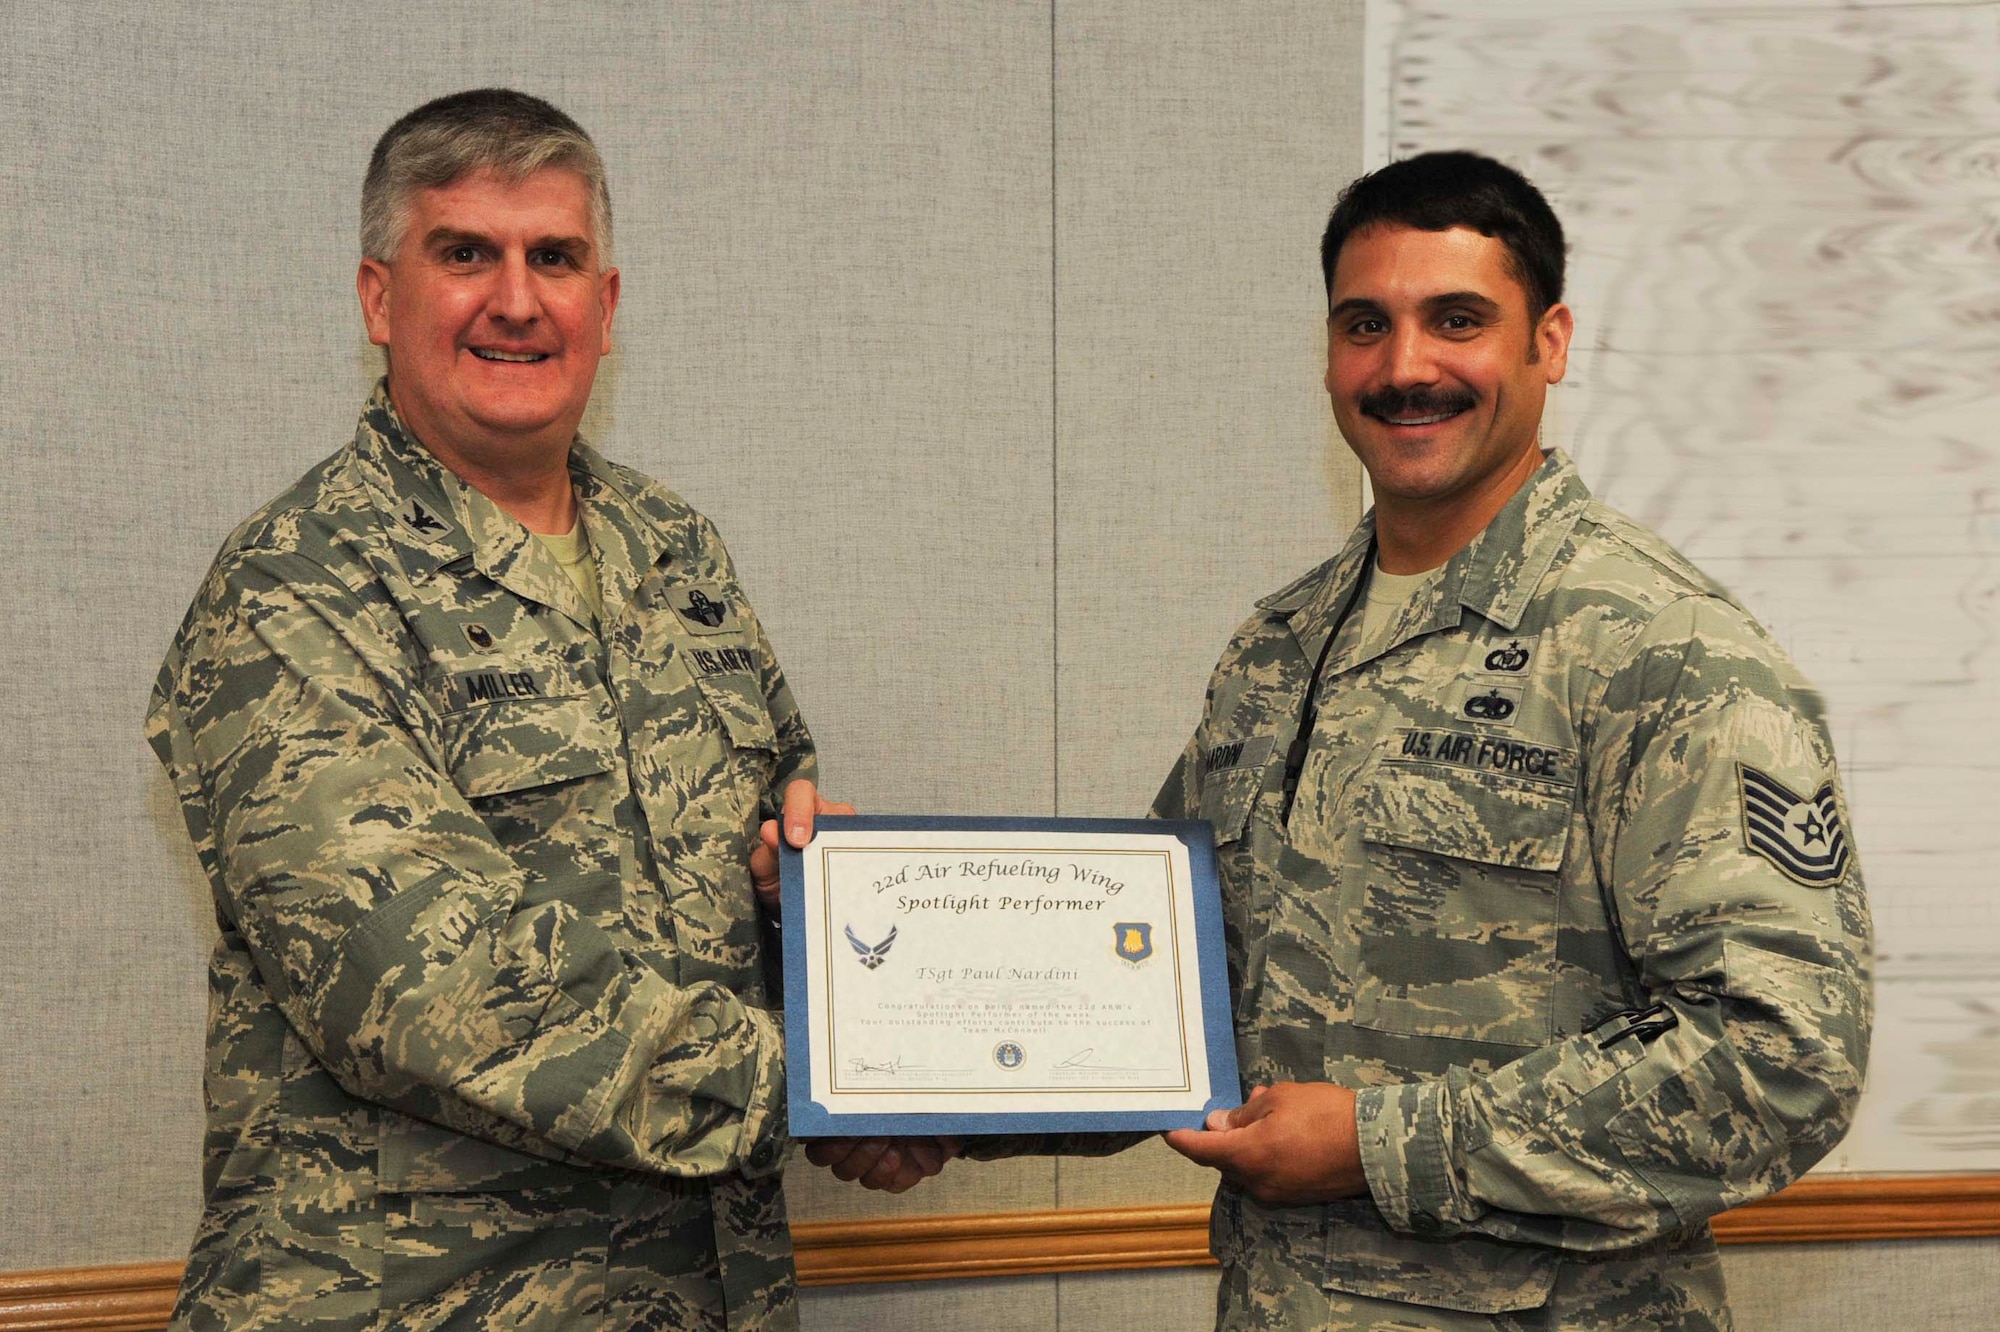 Tech. Sgt. Paul Nardini, 22nd Air Refueling Wing command and control procedures instructor,  poses with Col. Albert Miller, 22nd Air Refueling Wing commander, March 28, 2017, at McConnell Air Force Base, Kan. Nardini received the spotlight performer for the week of March 13–17. This photo has been edited for security purposes. (U.S. Air Force photo/Airman 1st Class Jenna K. Caldwell) 